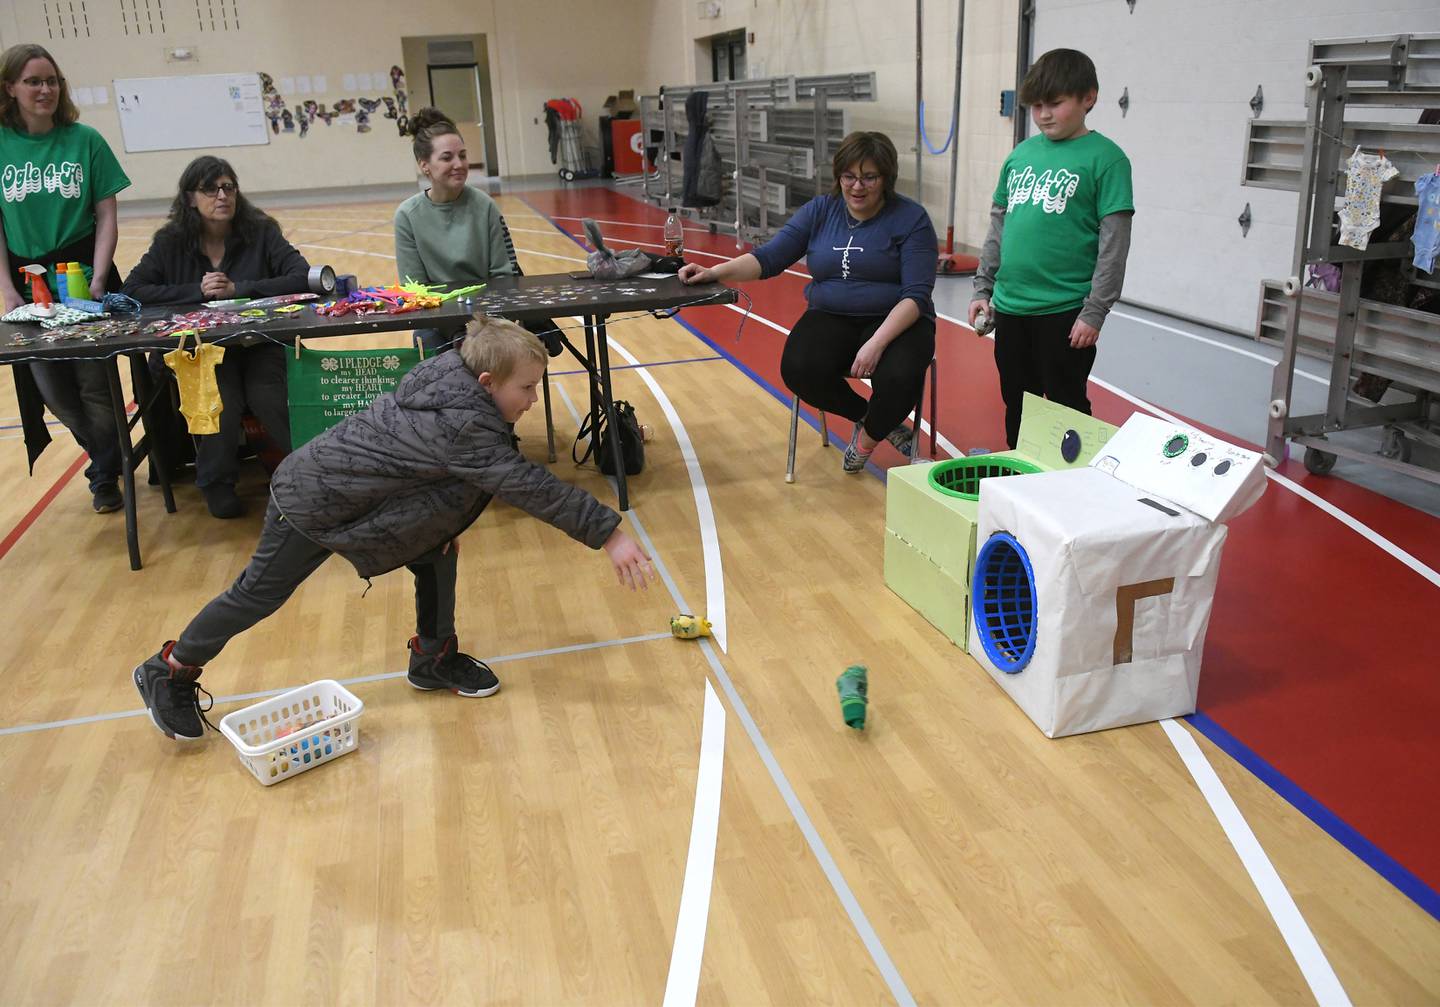 Wyatt Frewin, 6, of Oregon, tosses a sock into a cardboard washer at the 4-H Penny Carnival on Saturday, March 18 at the the Blackhawk Center in Oregon. The Ogle County Clovers 4-H Club offered this game for participants.